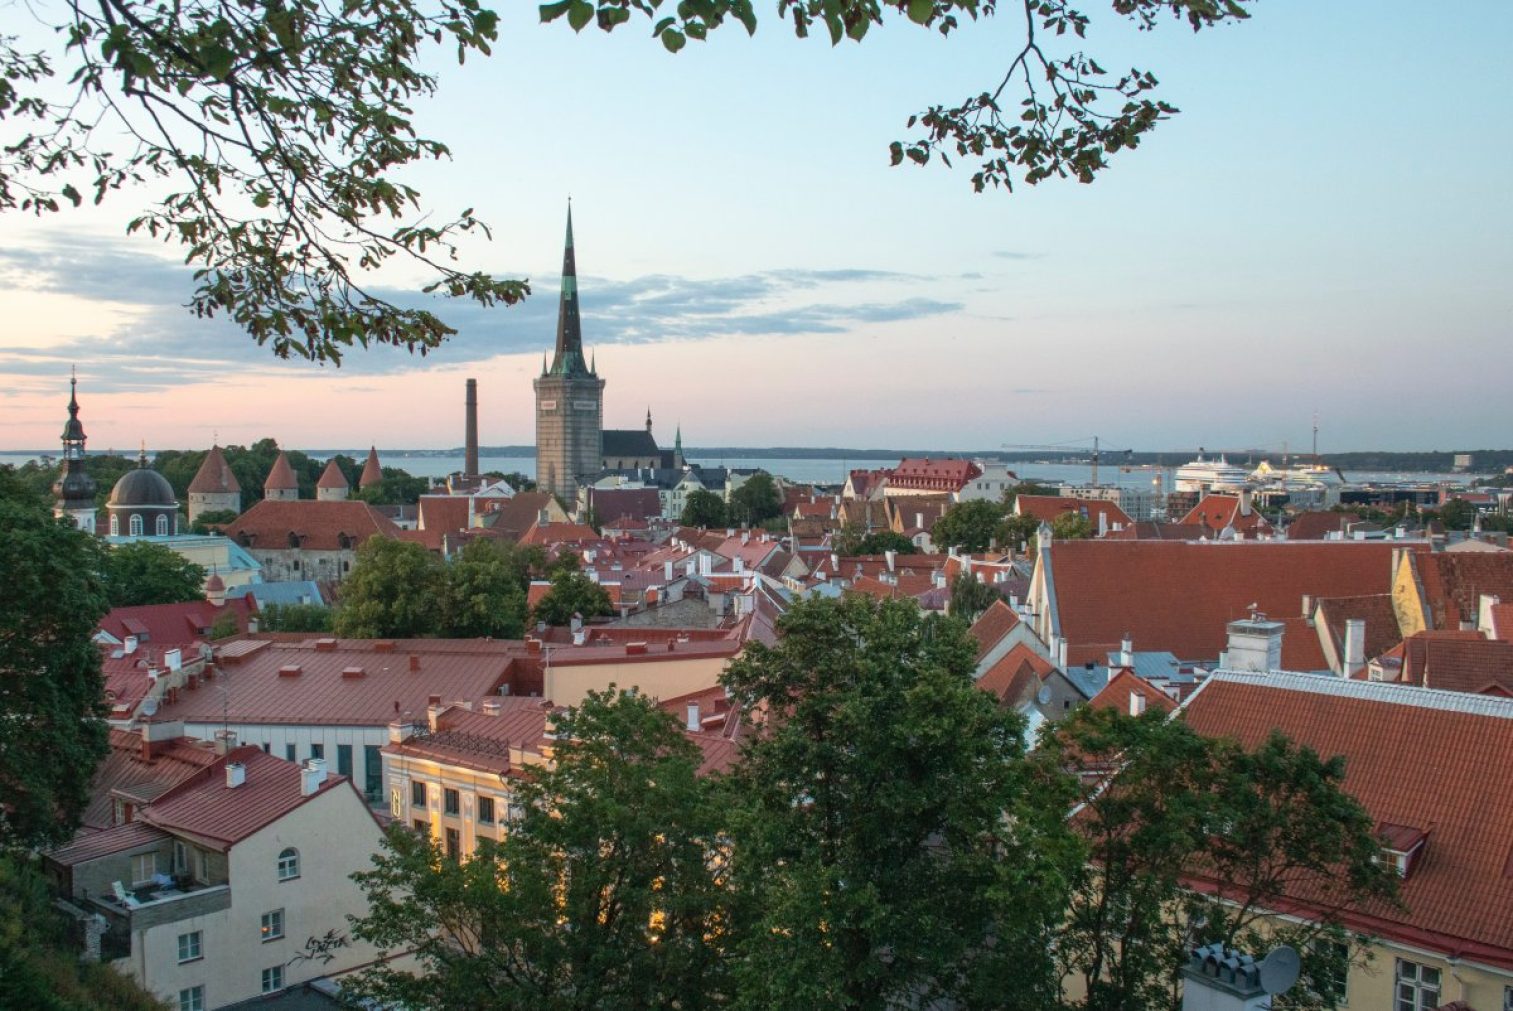 A sunset view to Tallinn old town